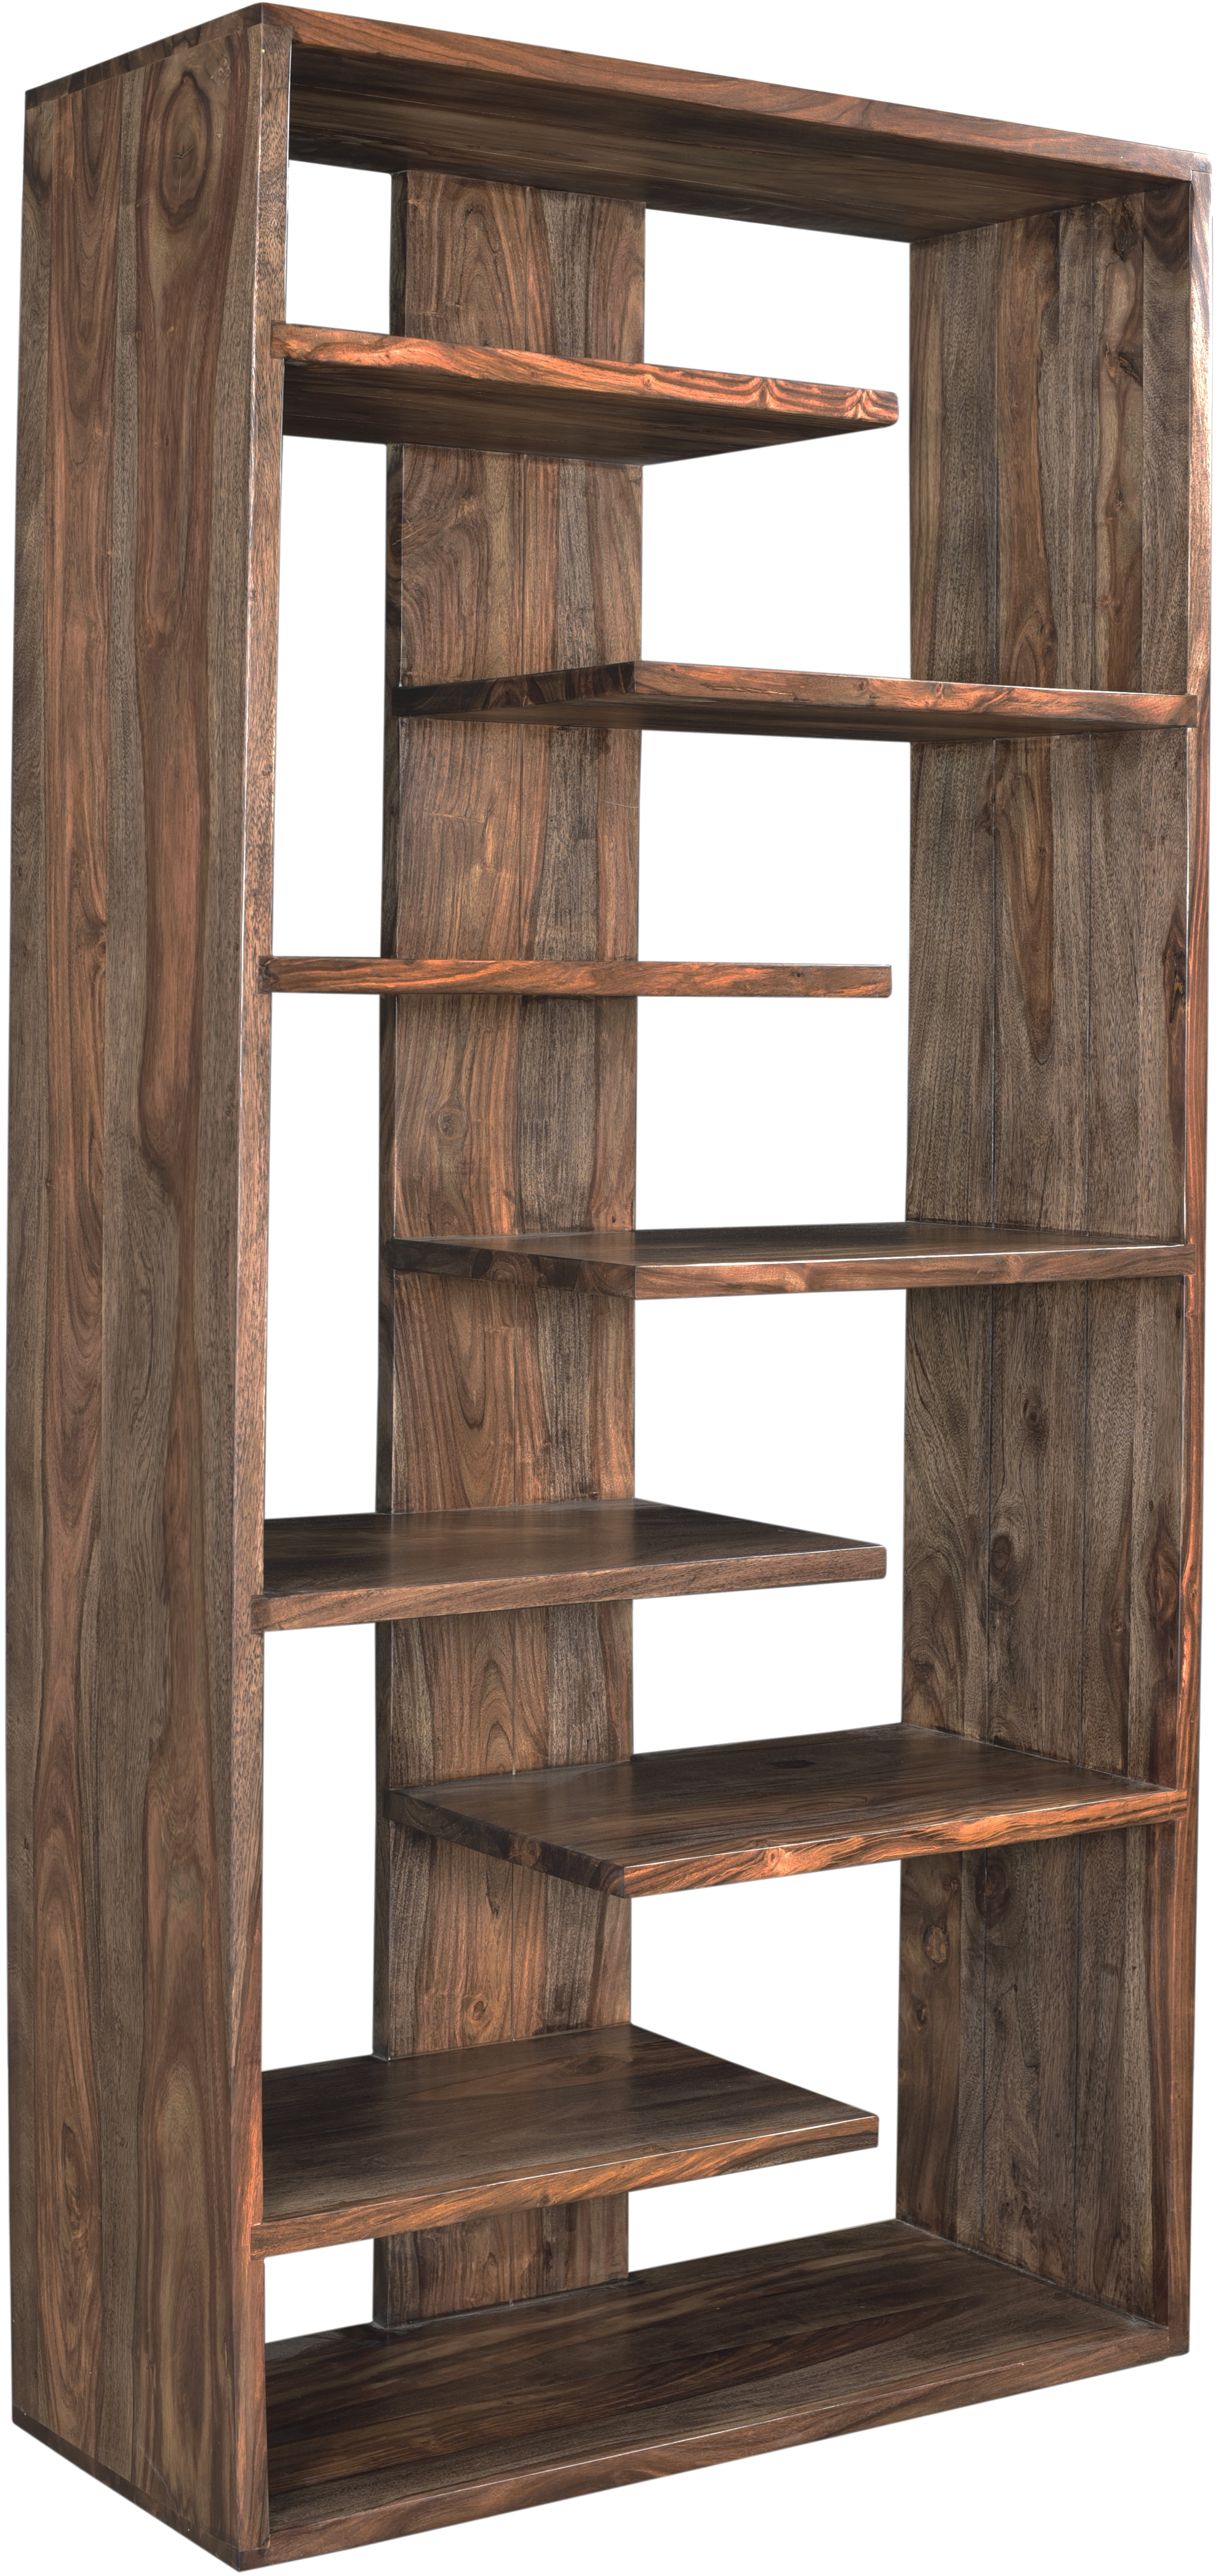 Coast to Coast Imports™ Brownstone Nut Brown Bookcase